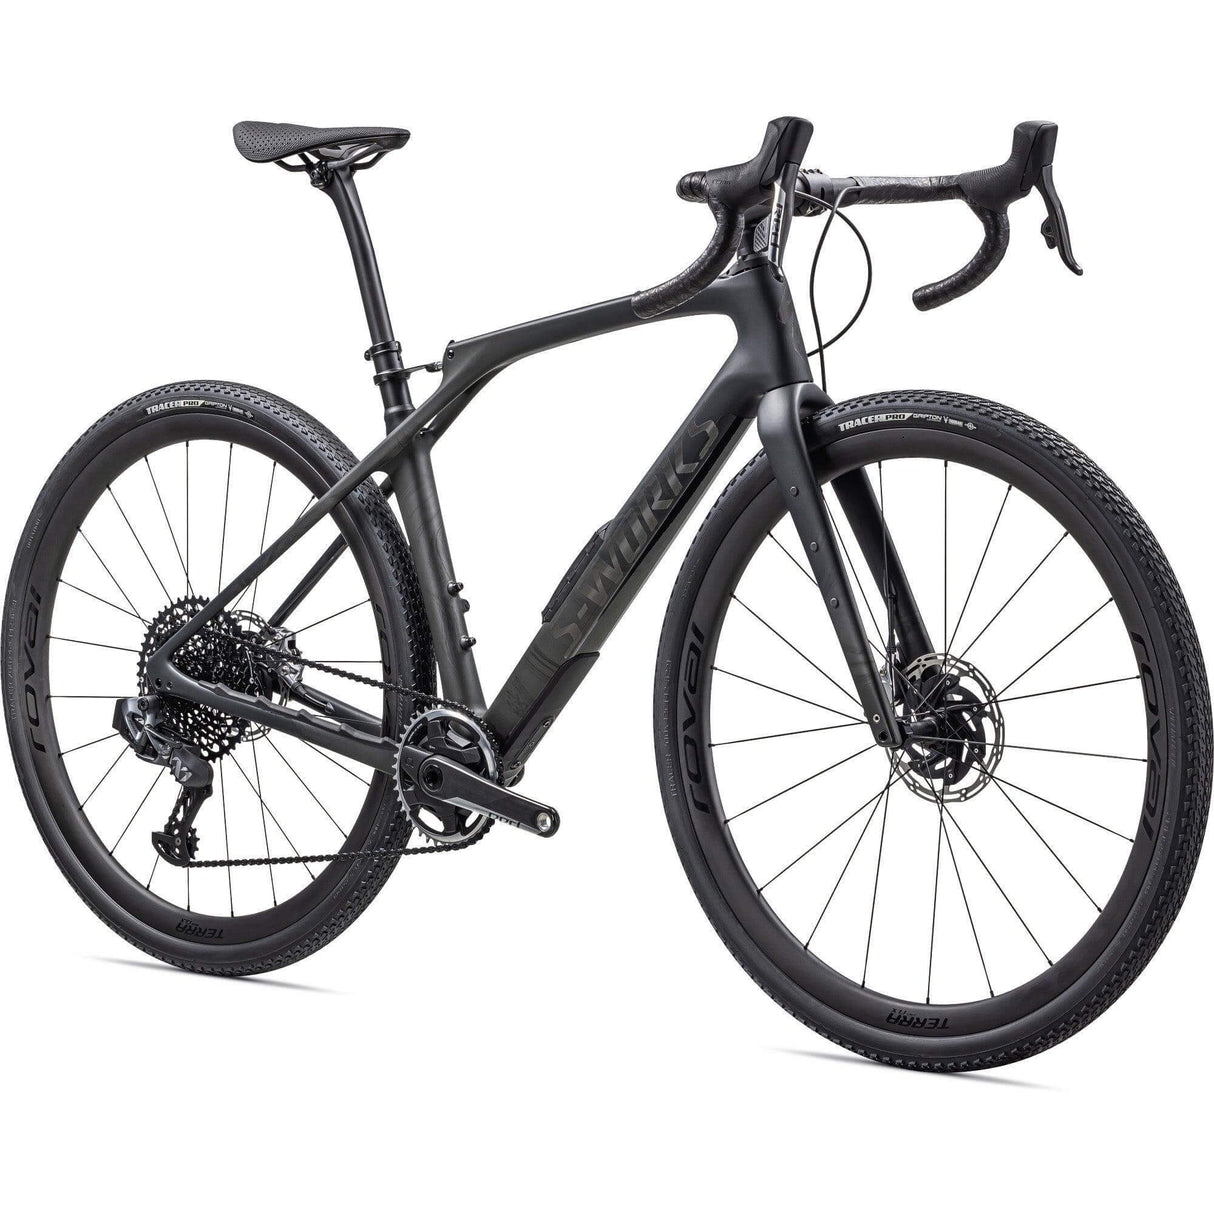 Specialized Diverge STR Expert | Strictly Bicycles